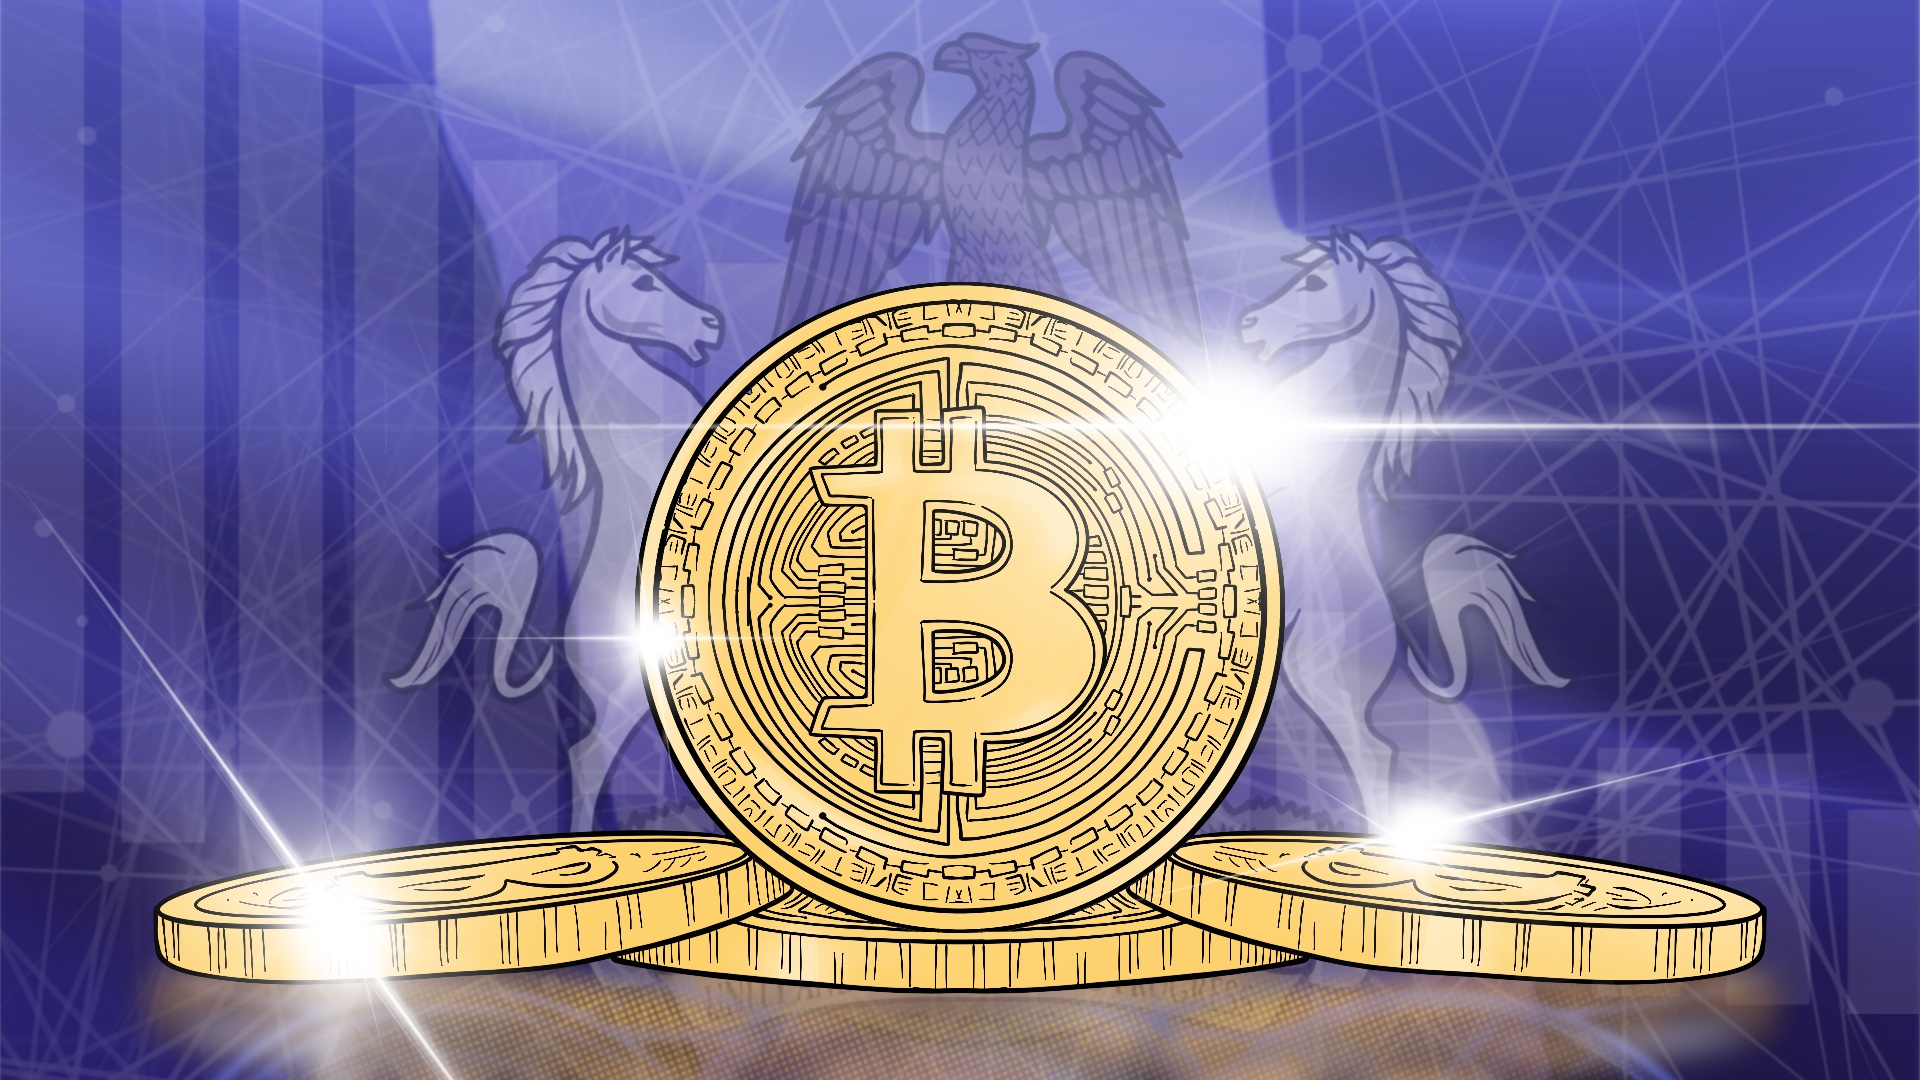 Exploring Bitcoin Trading Opportunities in Nigeria